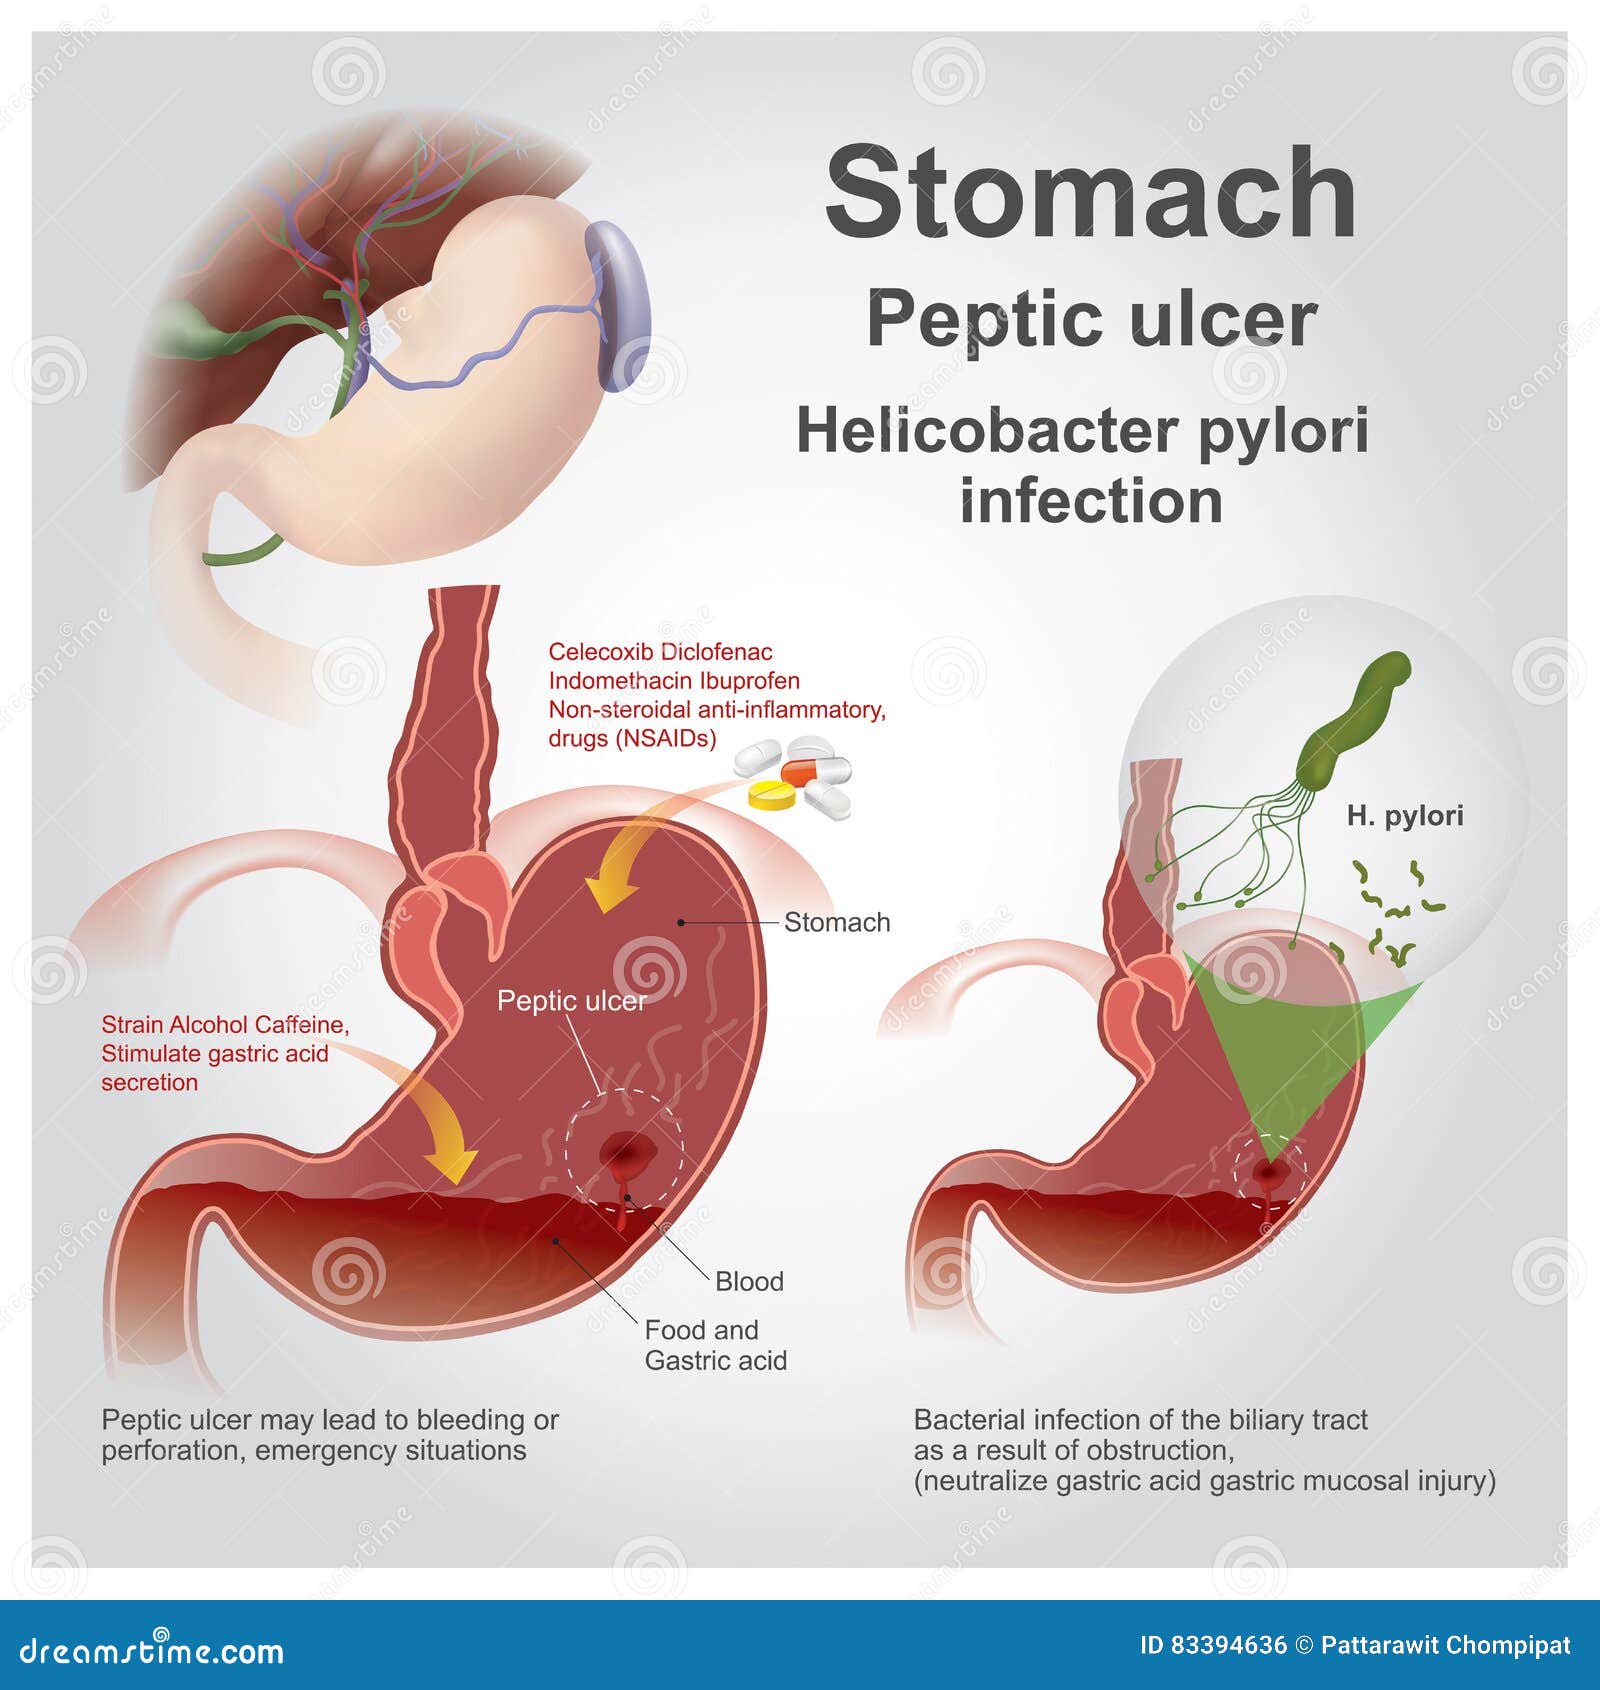 stomach peptic ulcer.